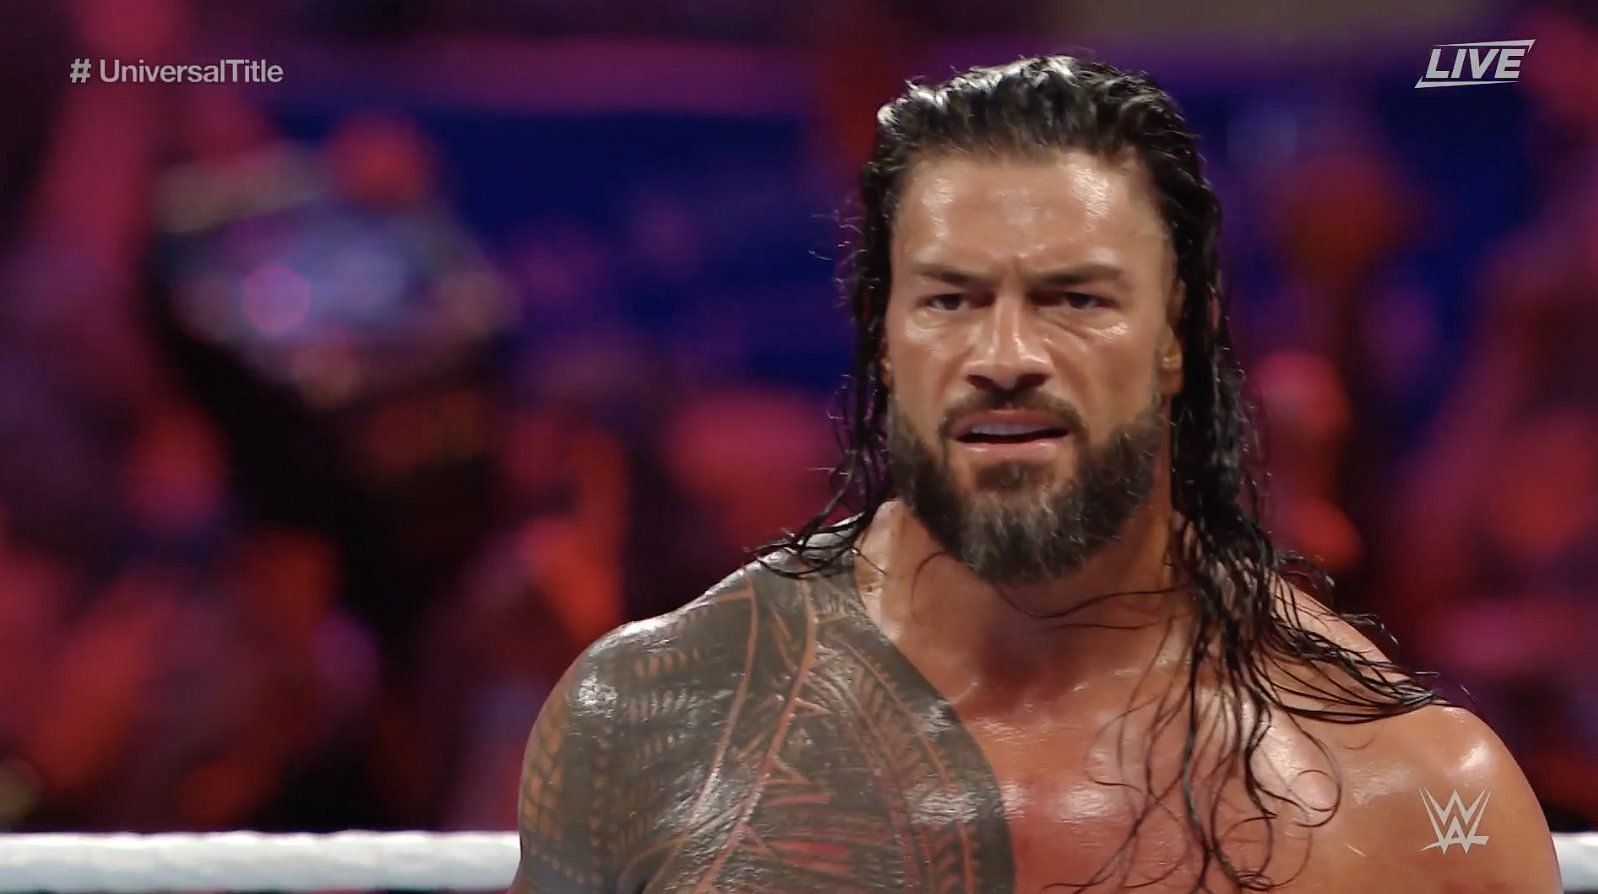 Roman Reigns claims to be the best at everything in wrestling